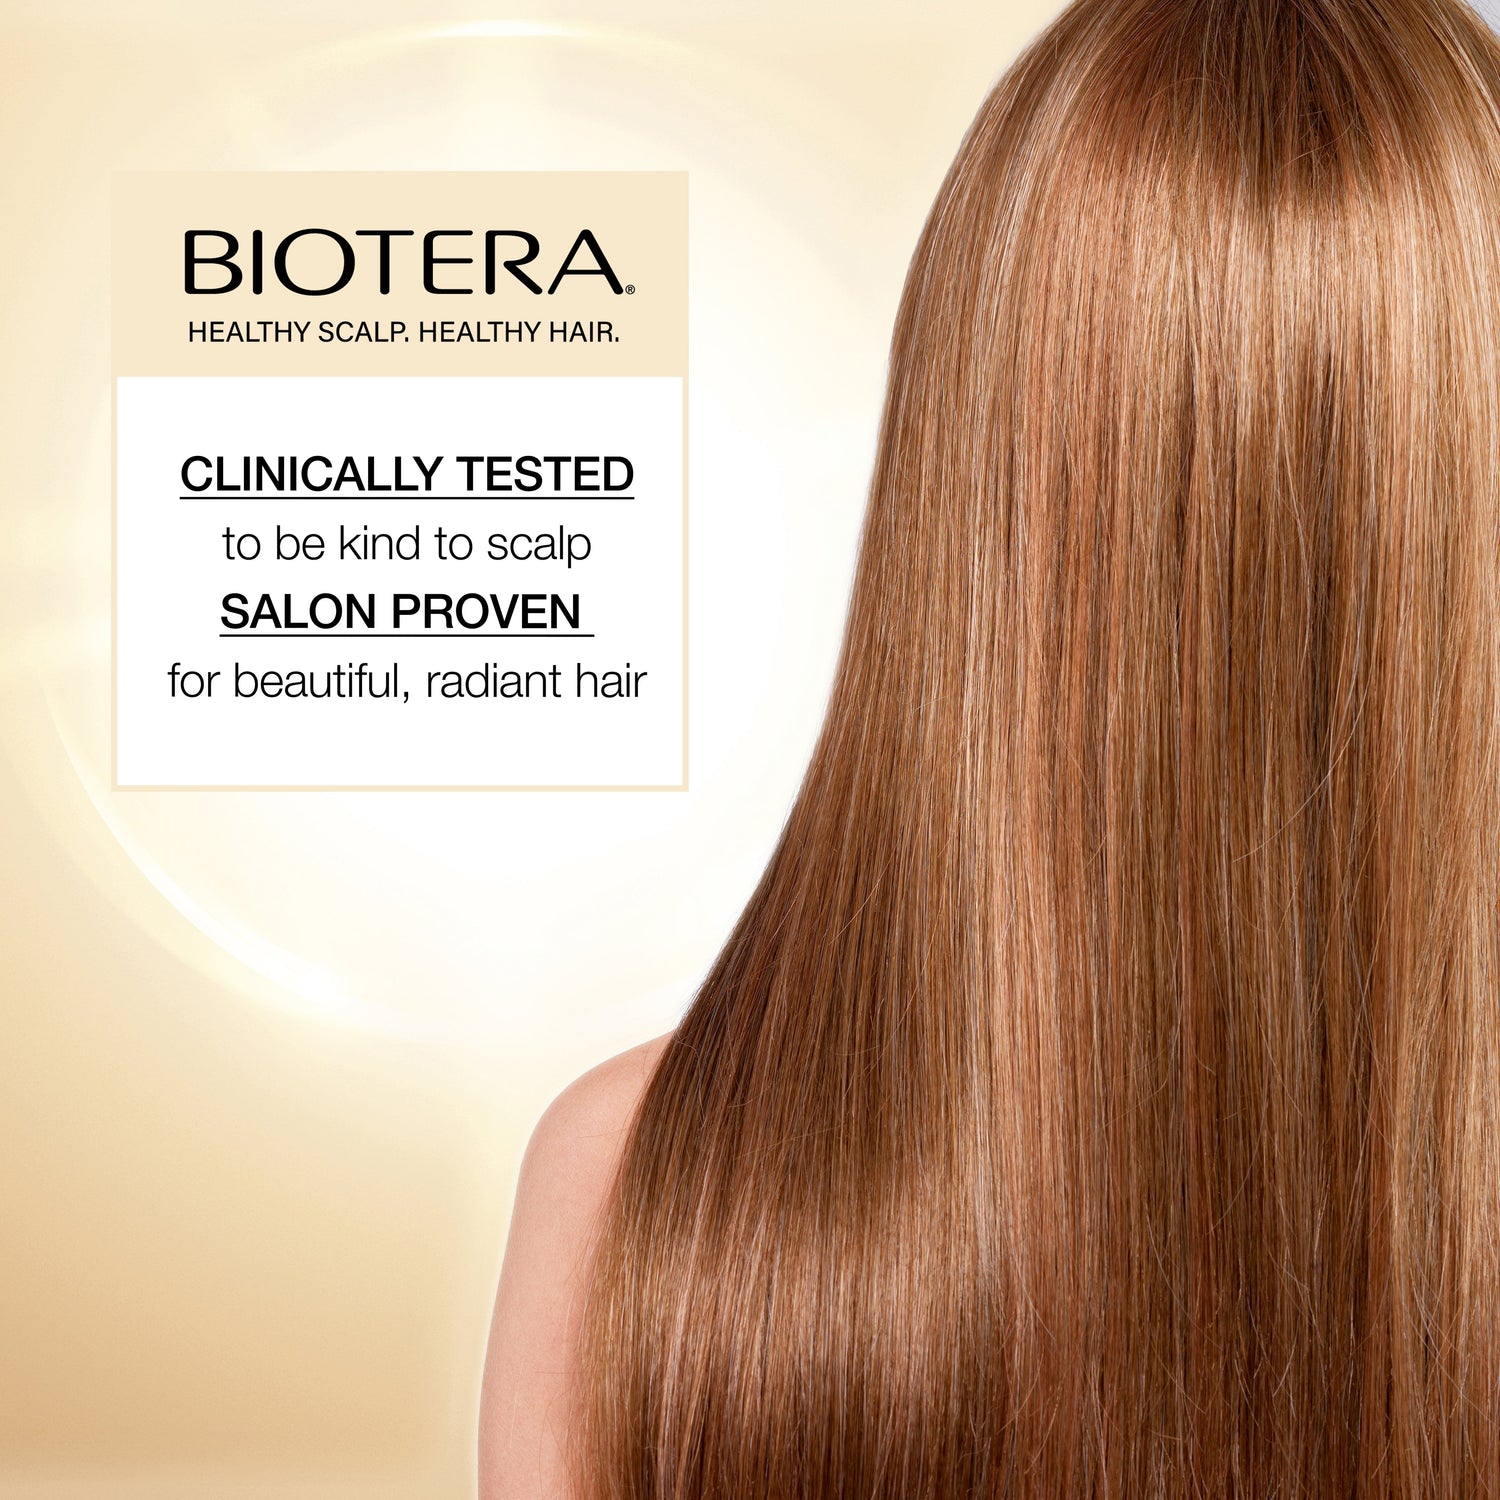 Biotera Ultra Moisturizing Leave-in conditioner is clinically tested and salon proven